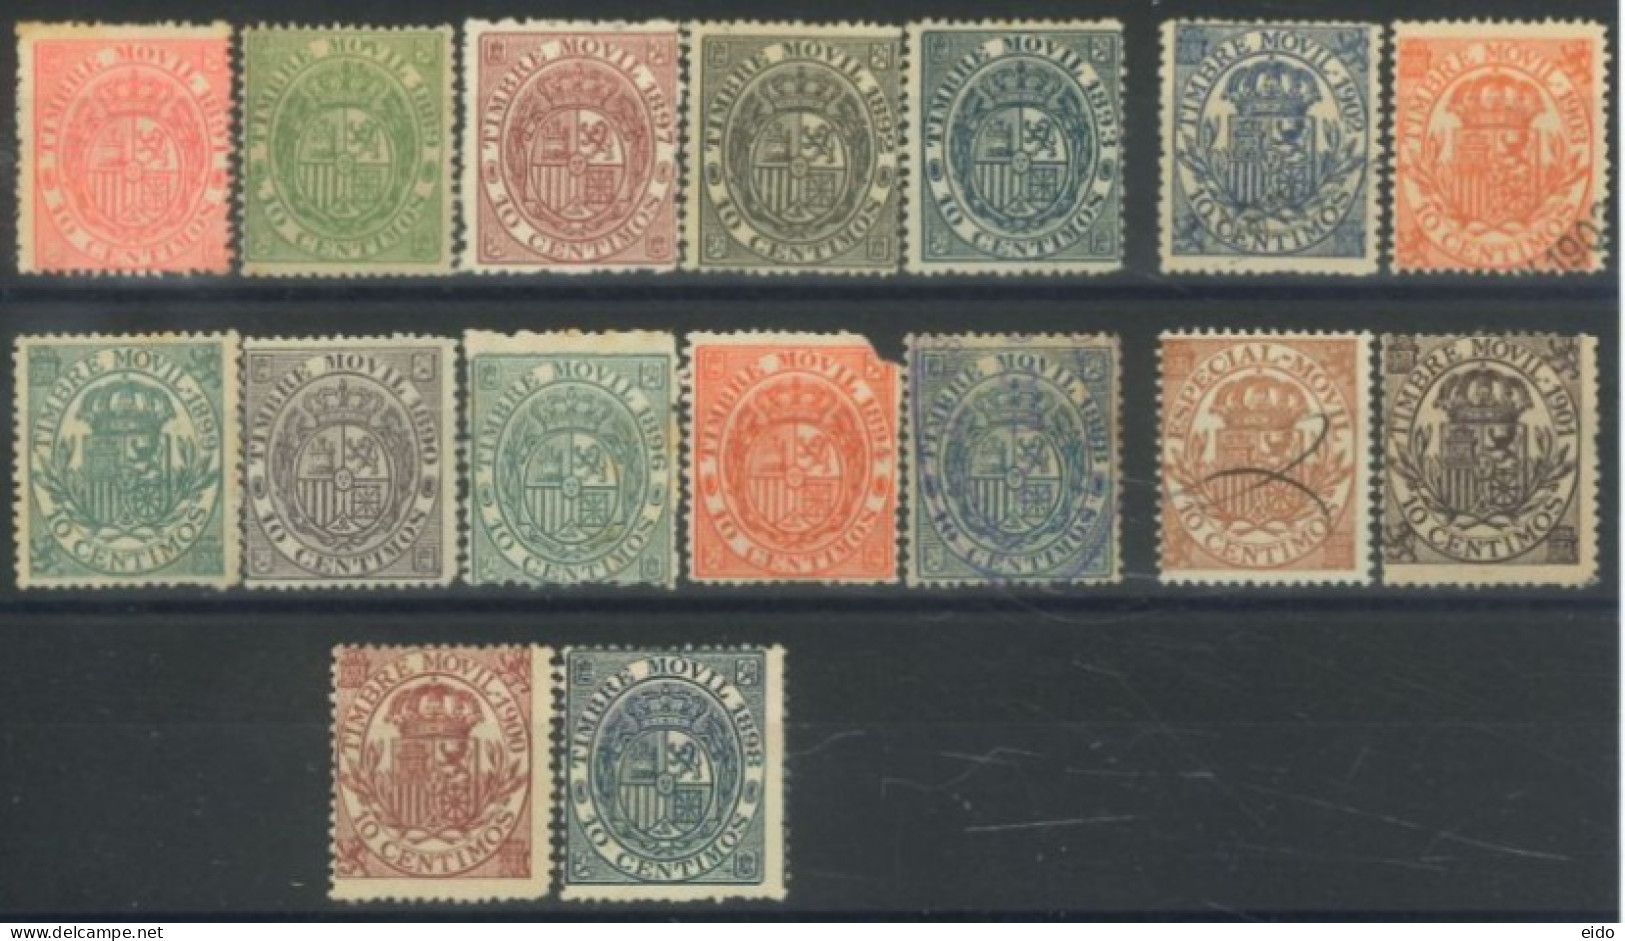 SPAIN, 1888/1903, REVENUE ADHESIVE STAMPS SET OF 16, MOSTLY MINT NO GUM (MNG), ONLY 3 STAMPS USED. - Ungebraucht